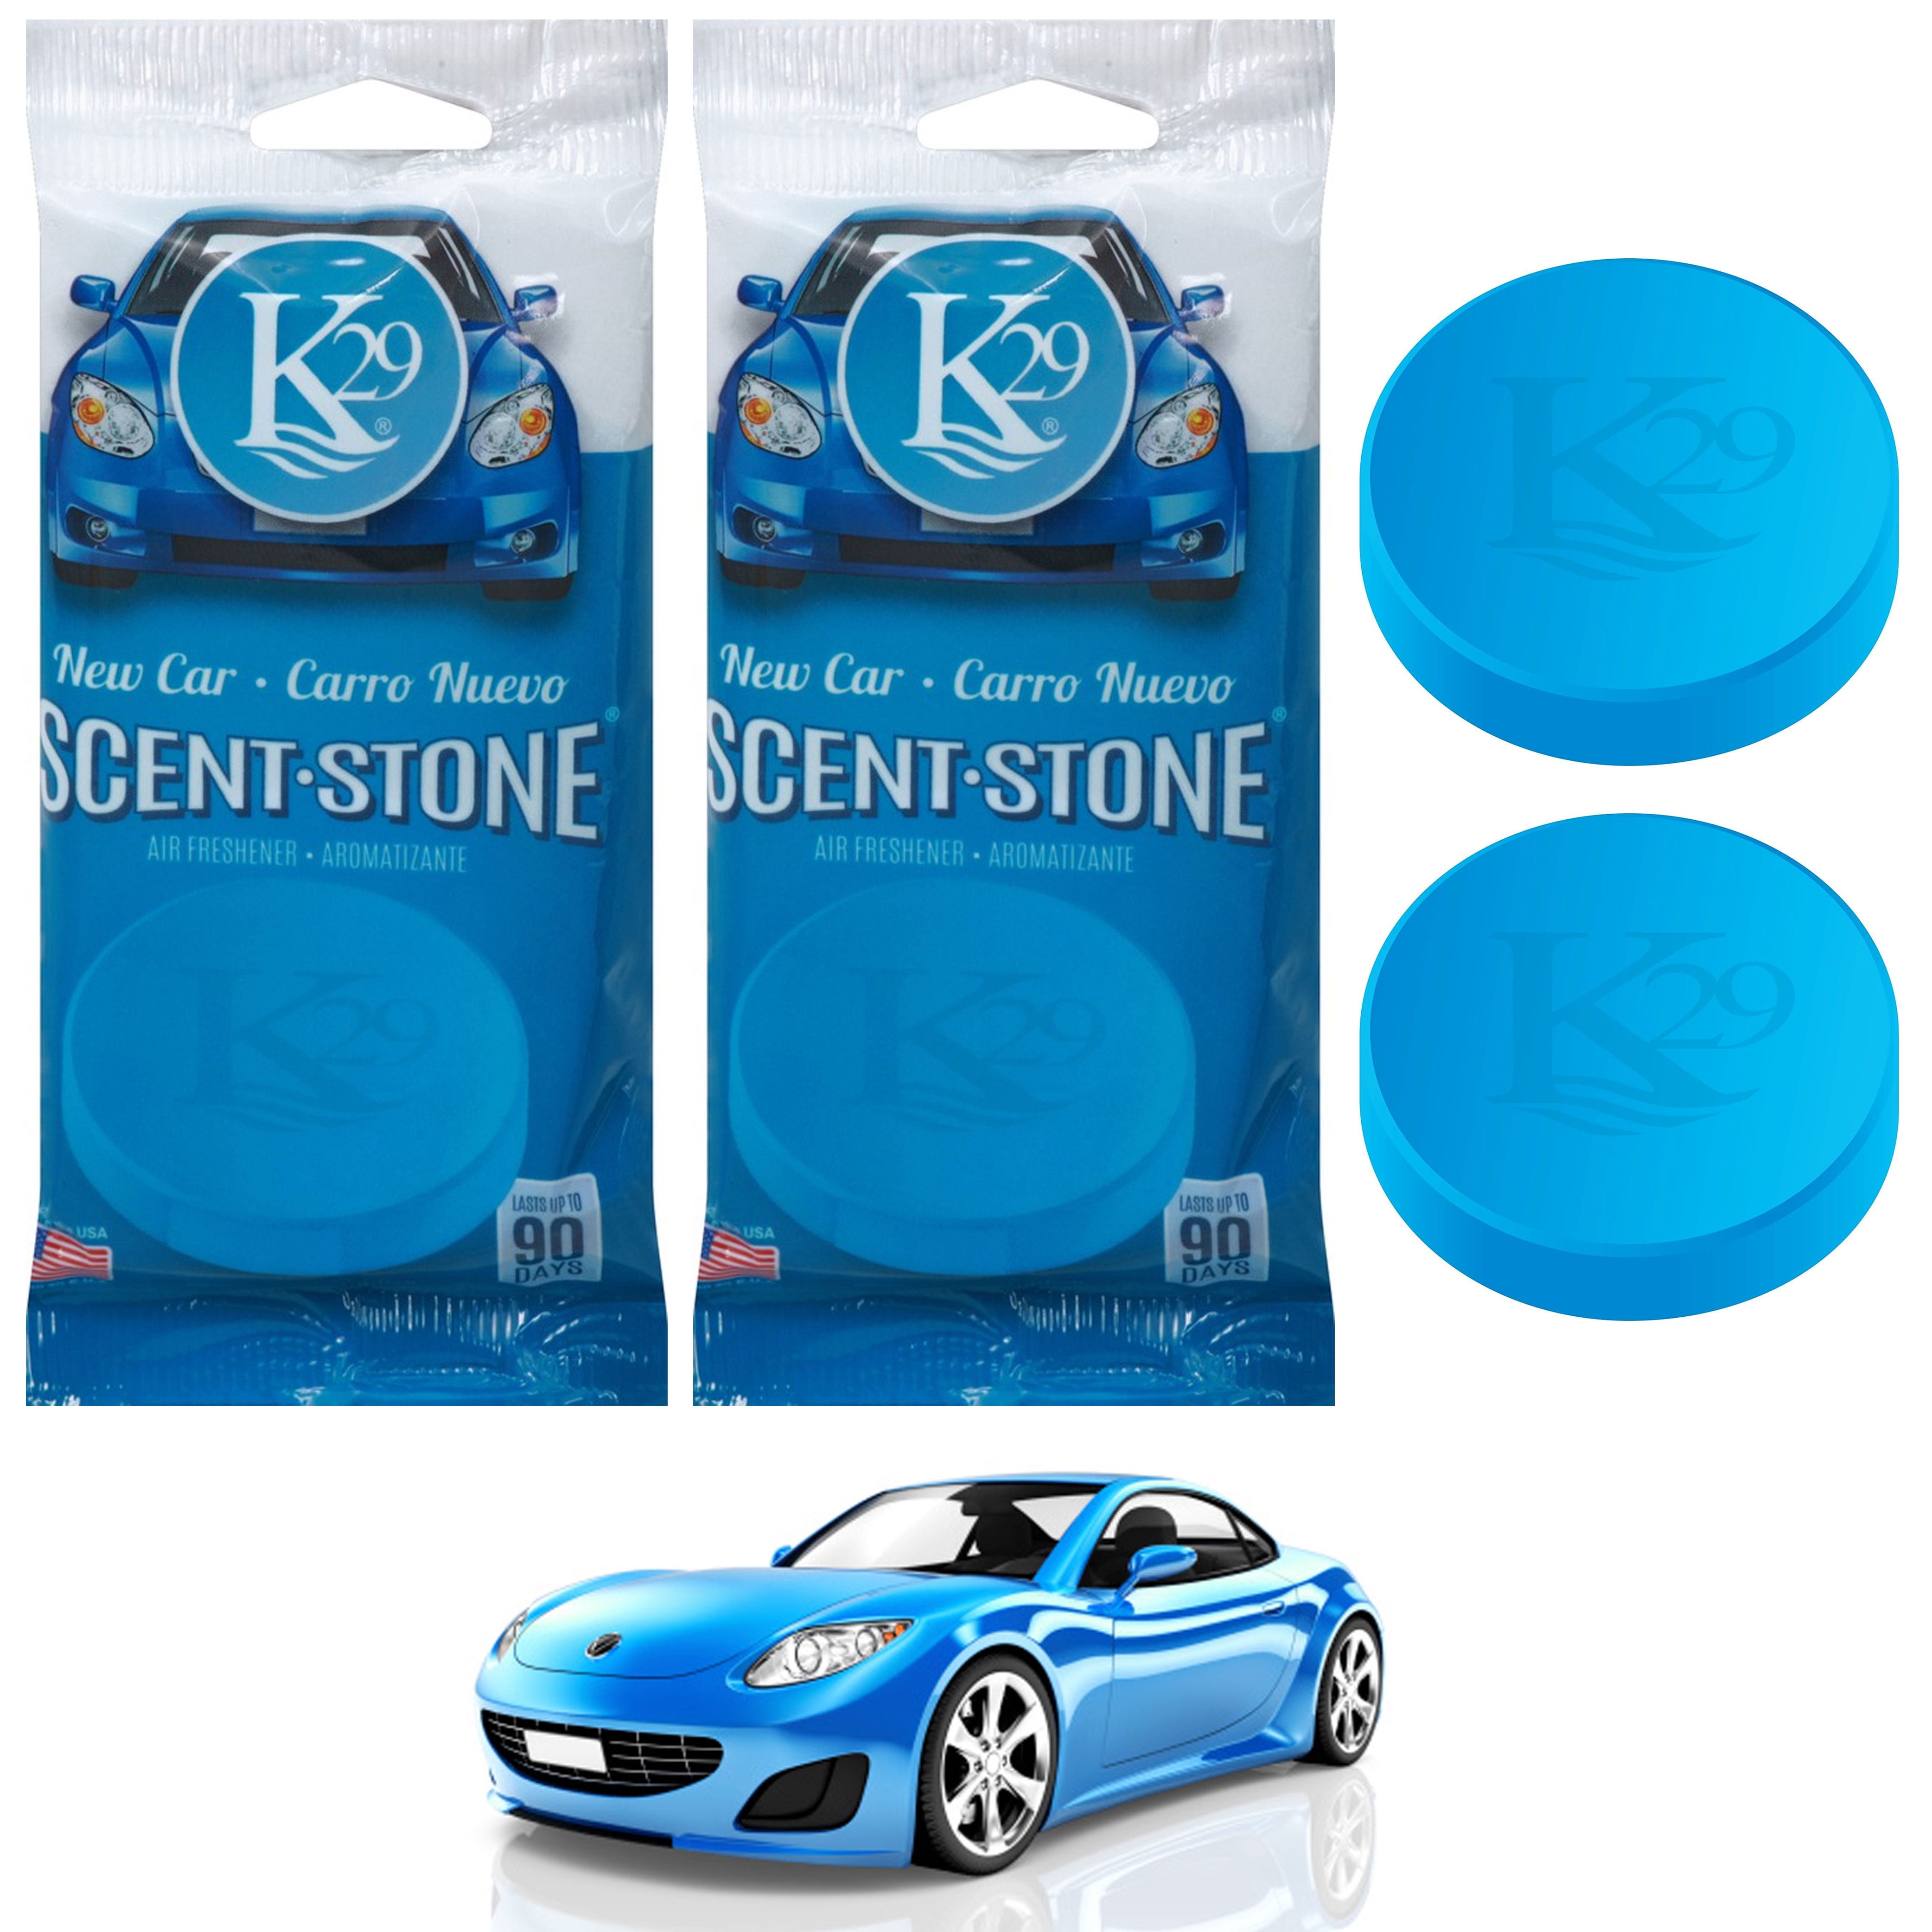 2 X New Car Scent Stones K29 Keystone Natural Aroma Air Freshener Home  Office